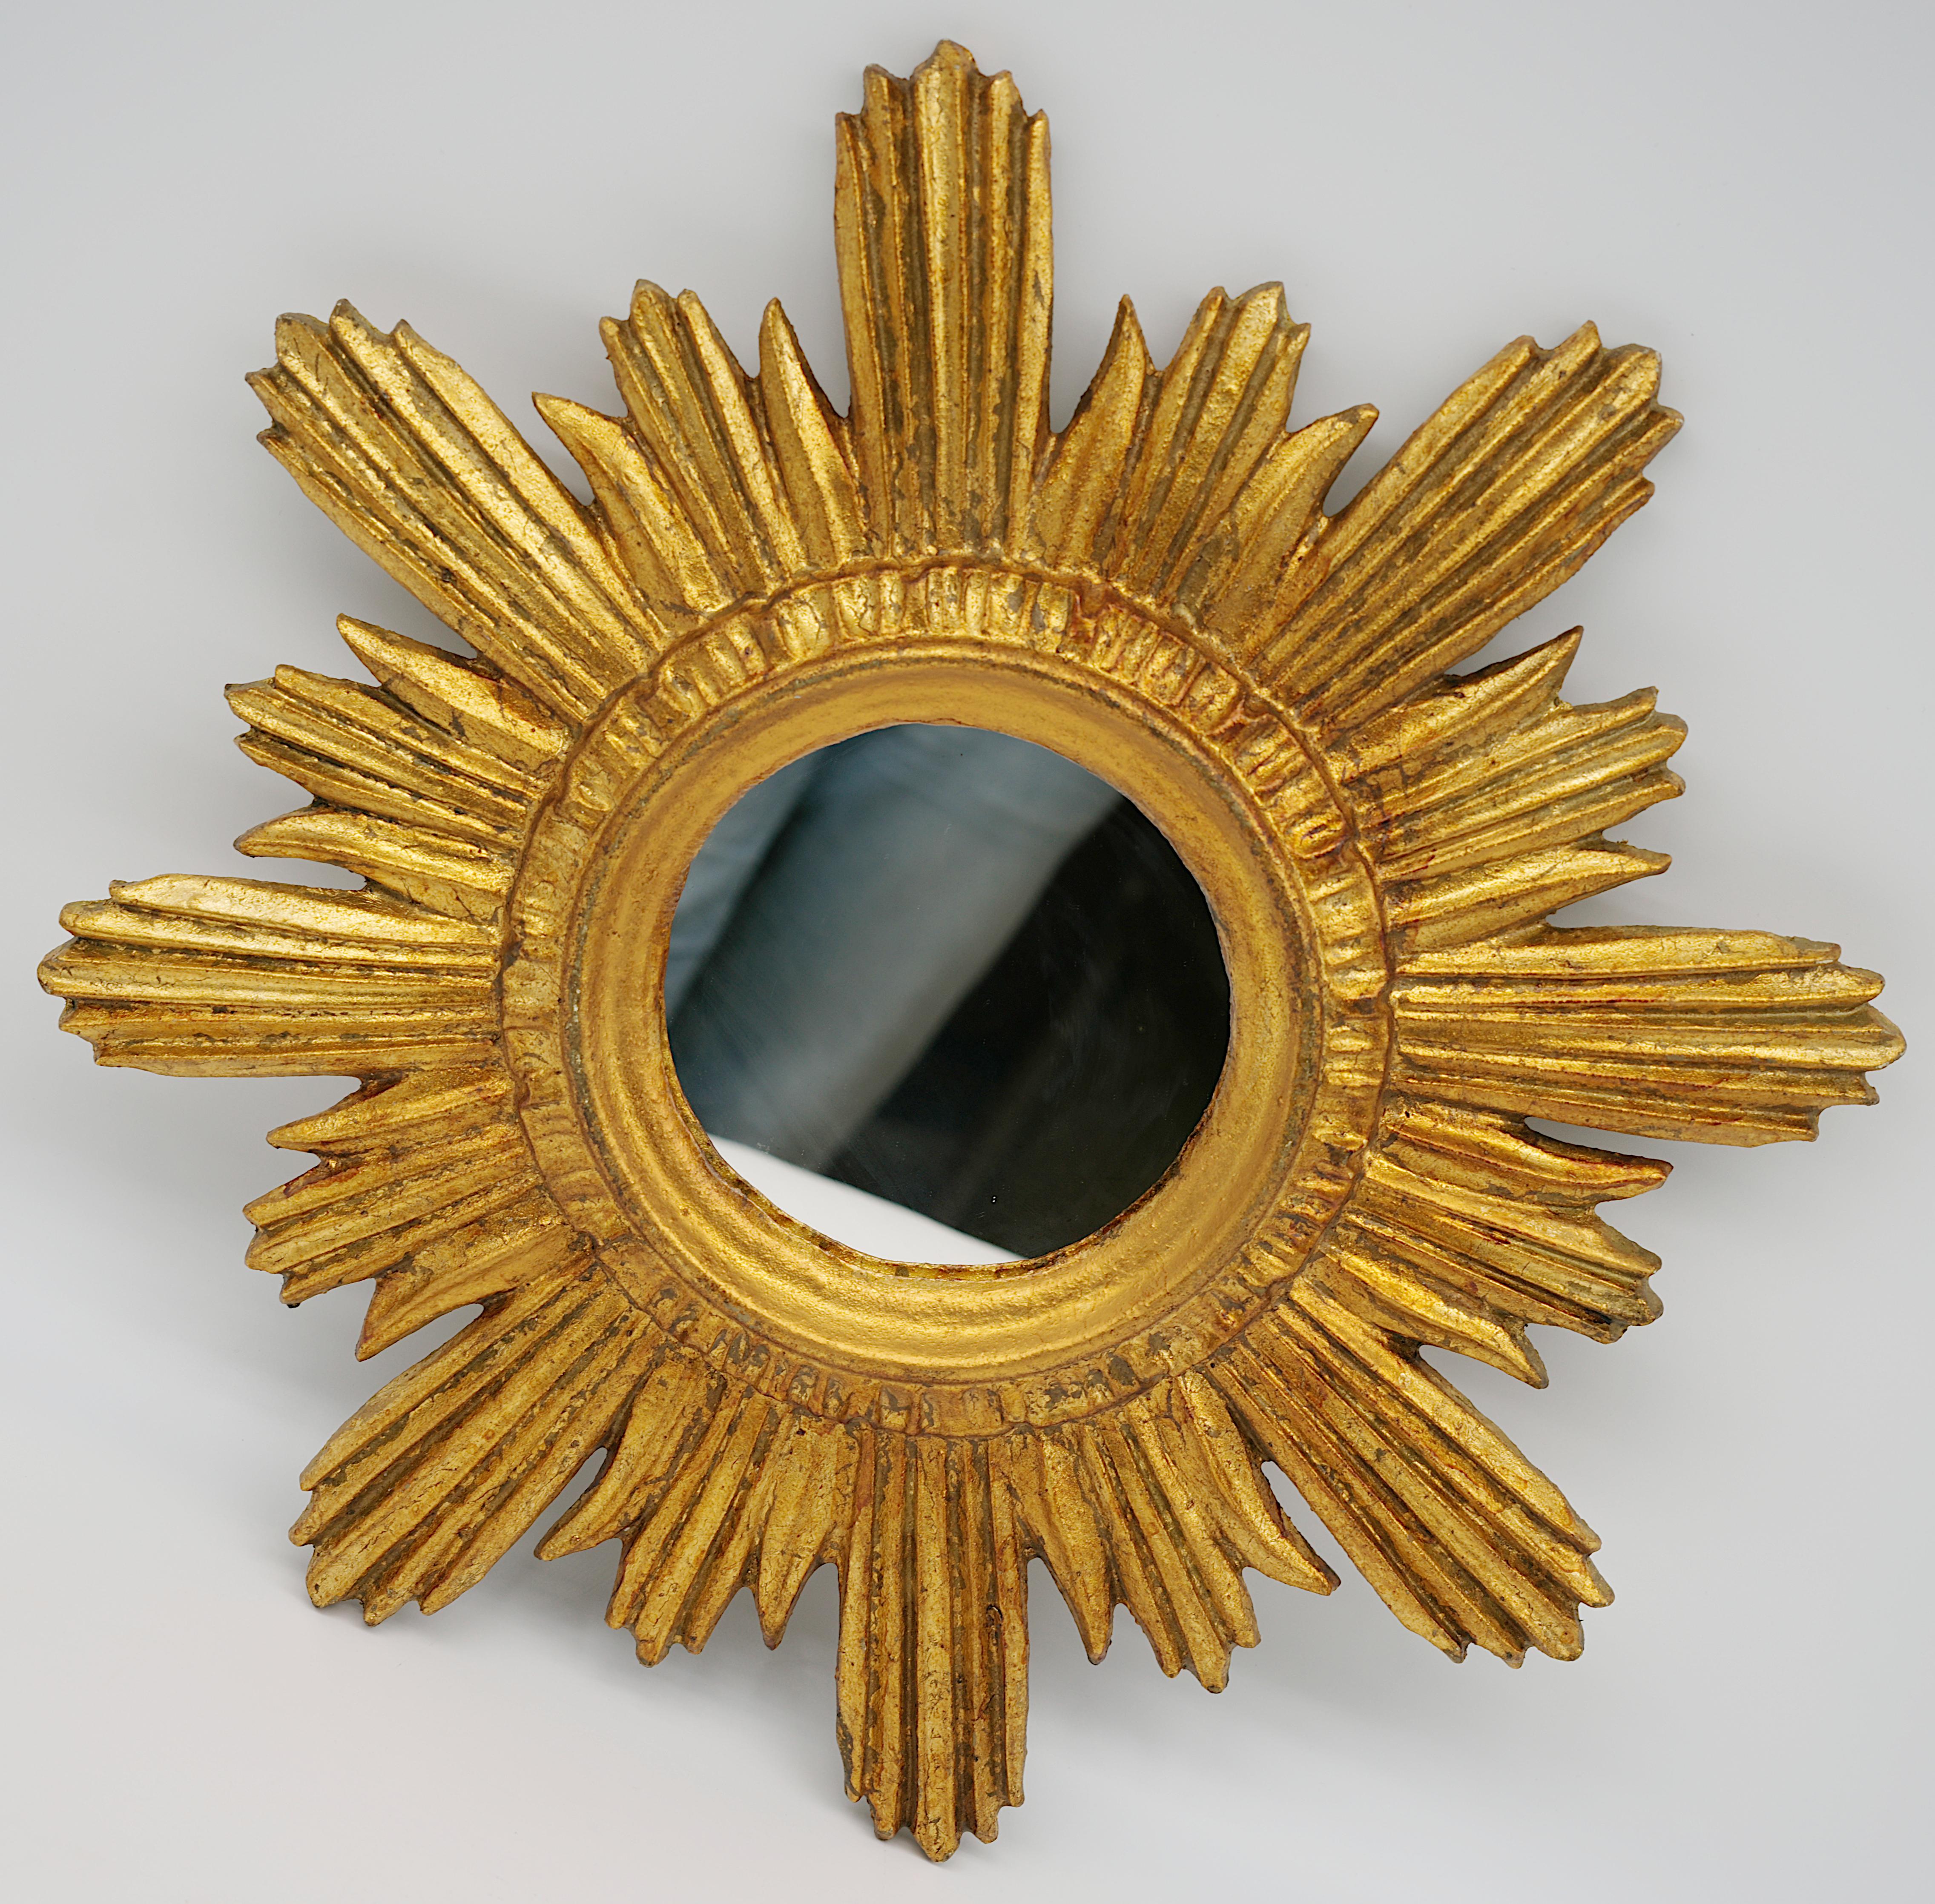 French mid-century wall mirror, France. Genuine from the 1950s. Resin mirror with radiating decoration. Original mirror in very good condition. Measures: Height: 1.2